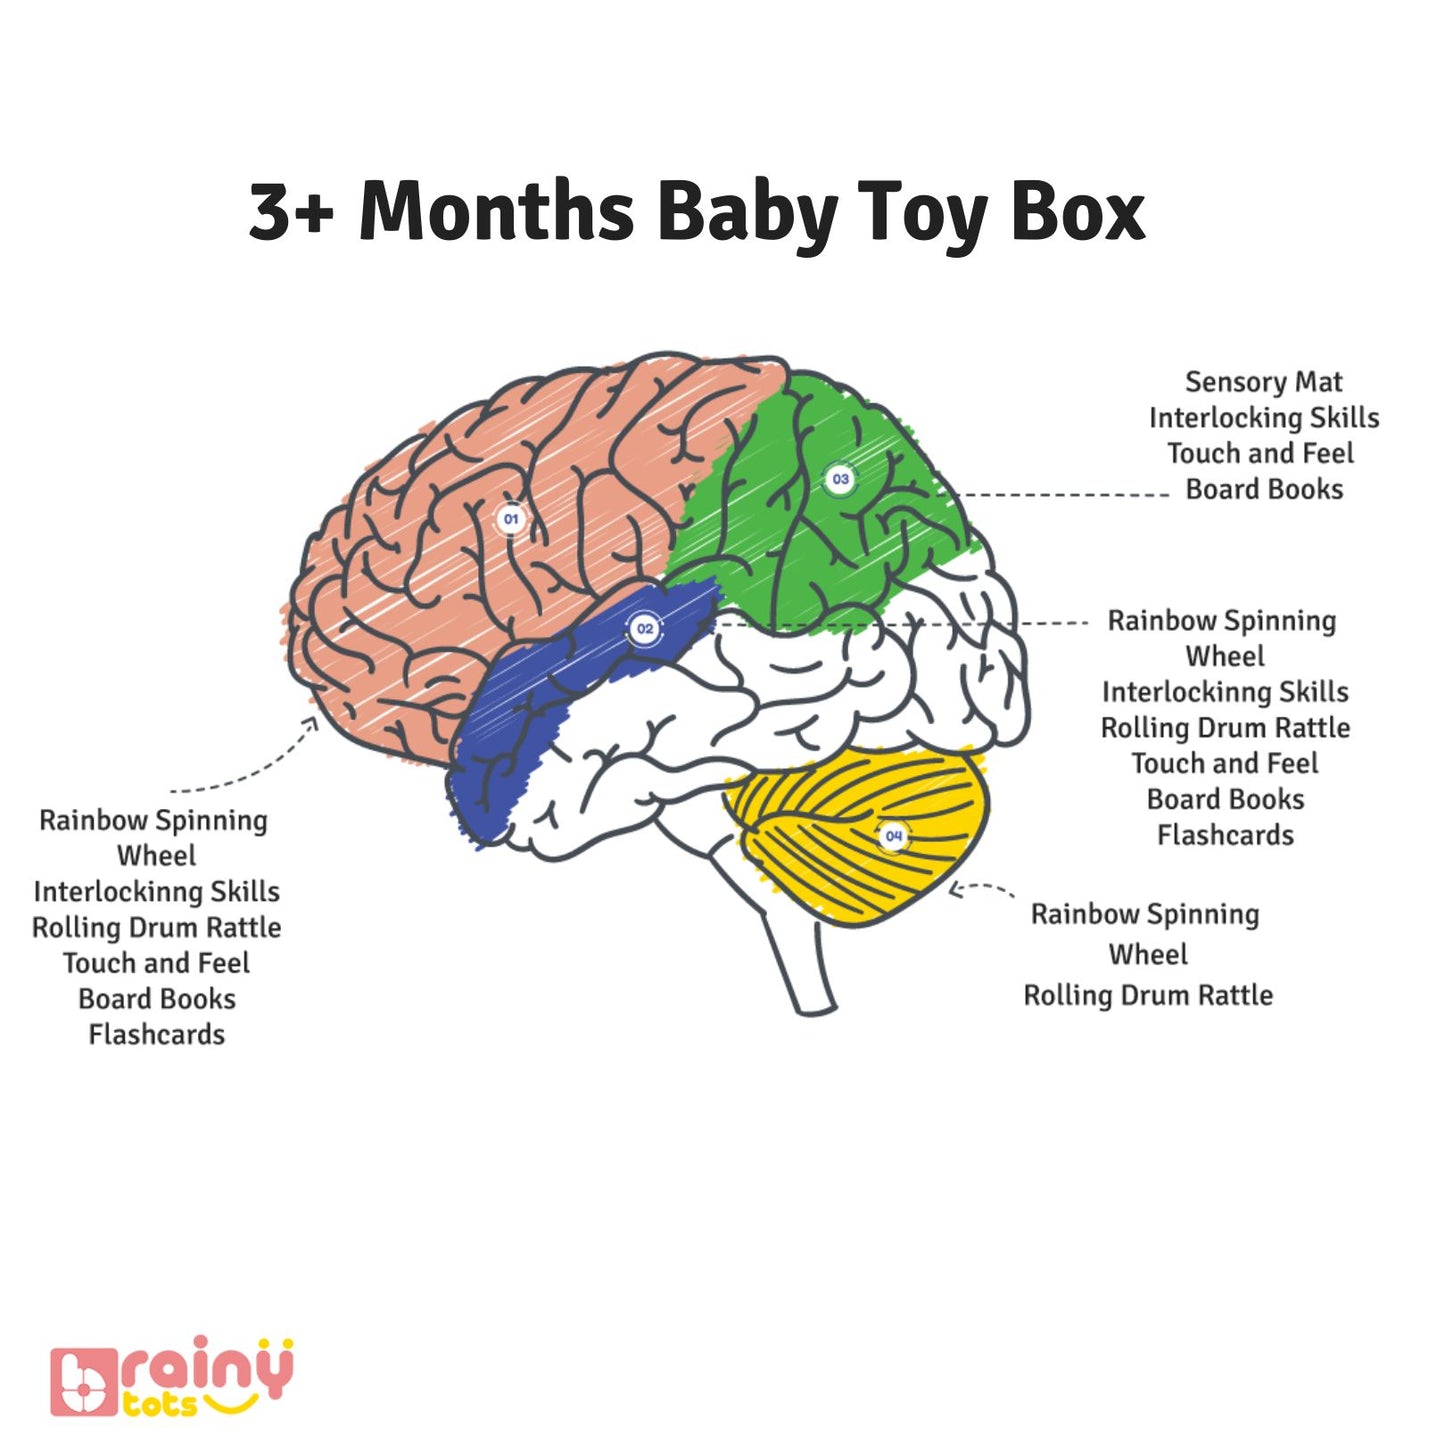 3 Plus Months Baby Toy Box